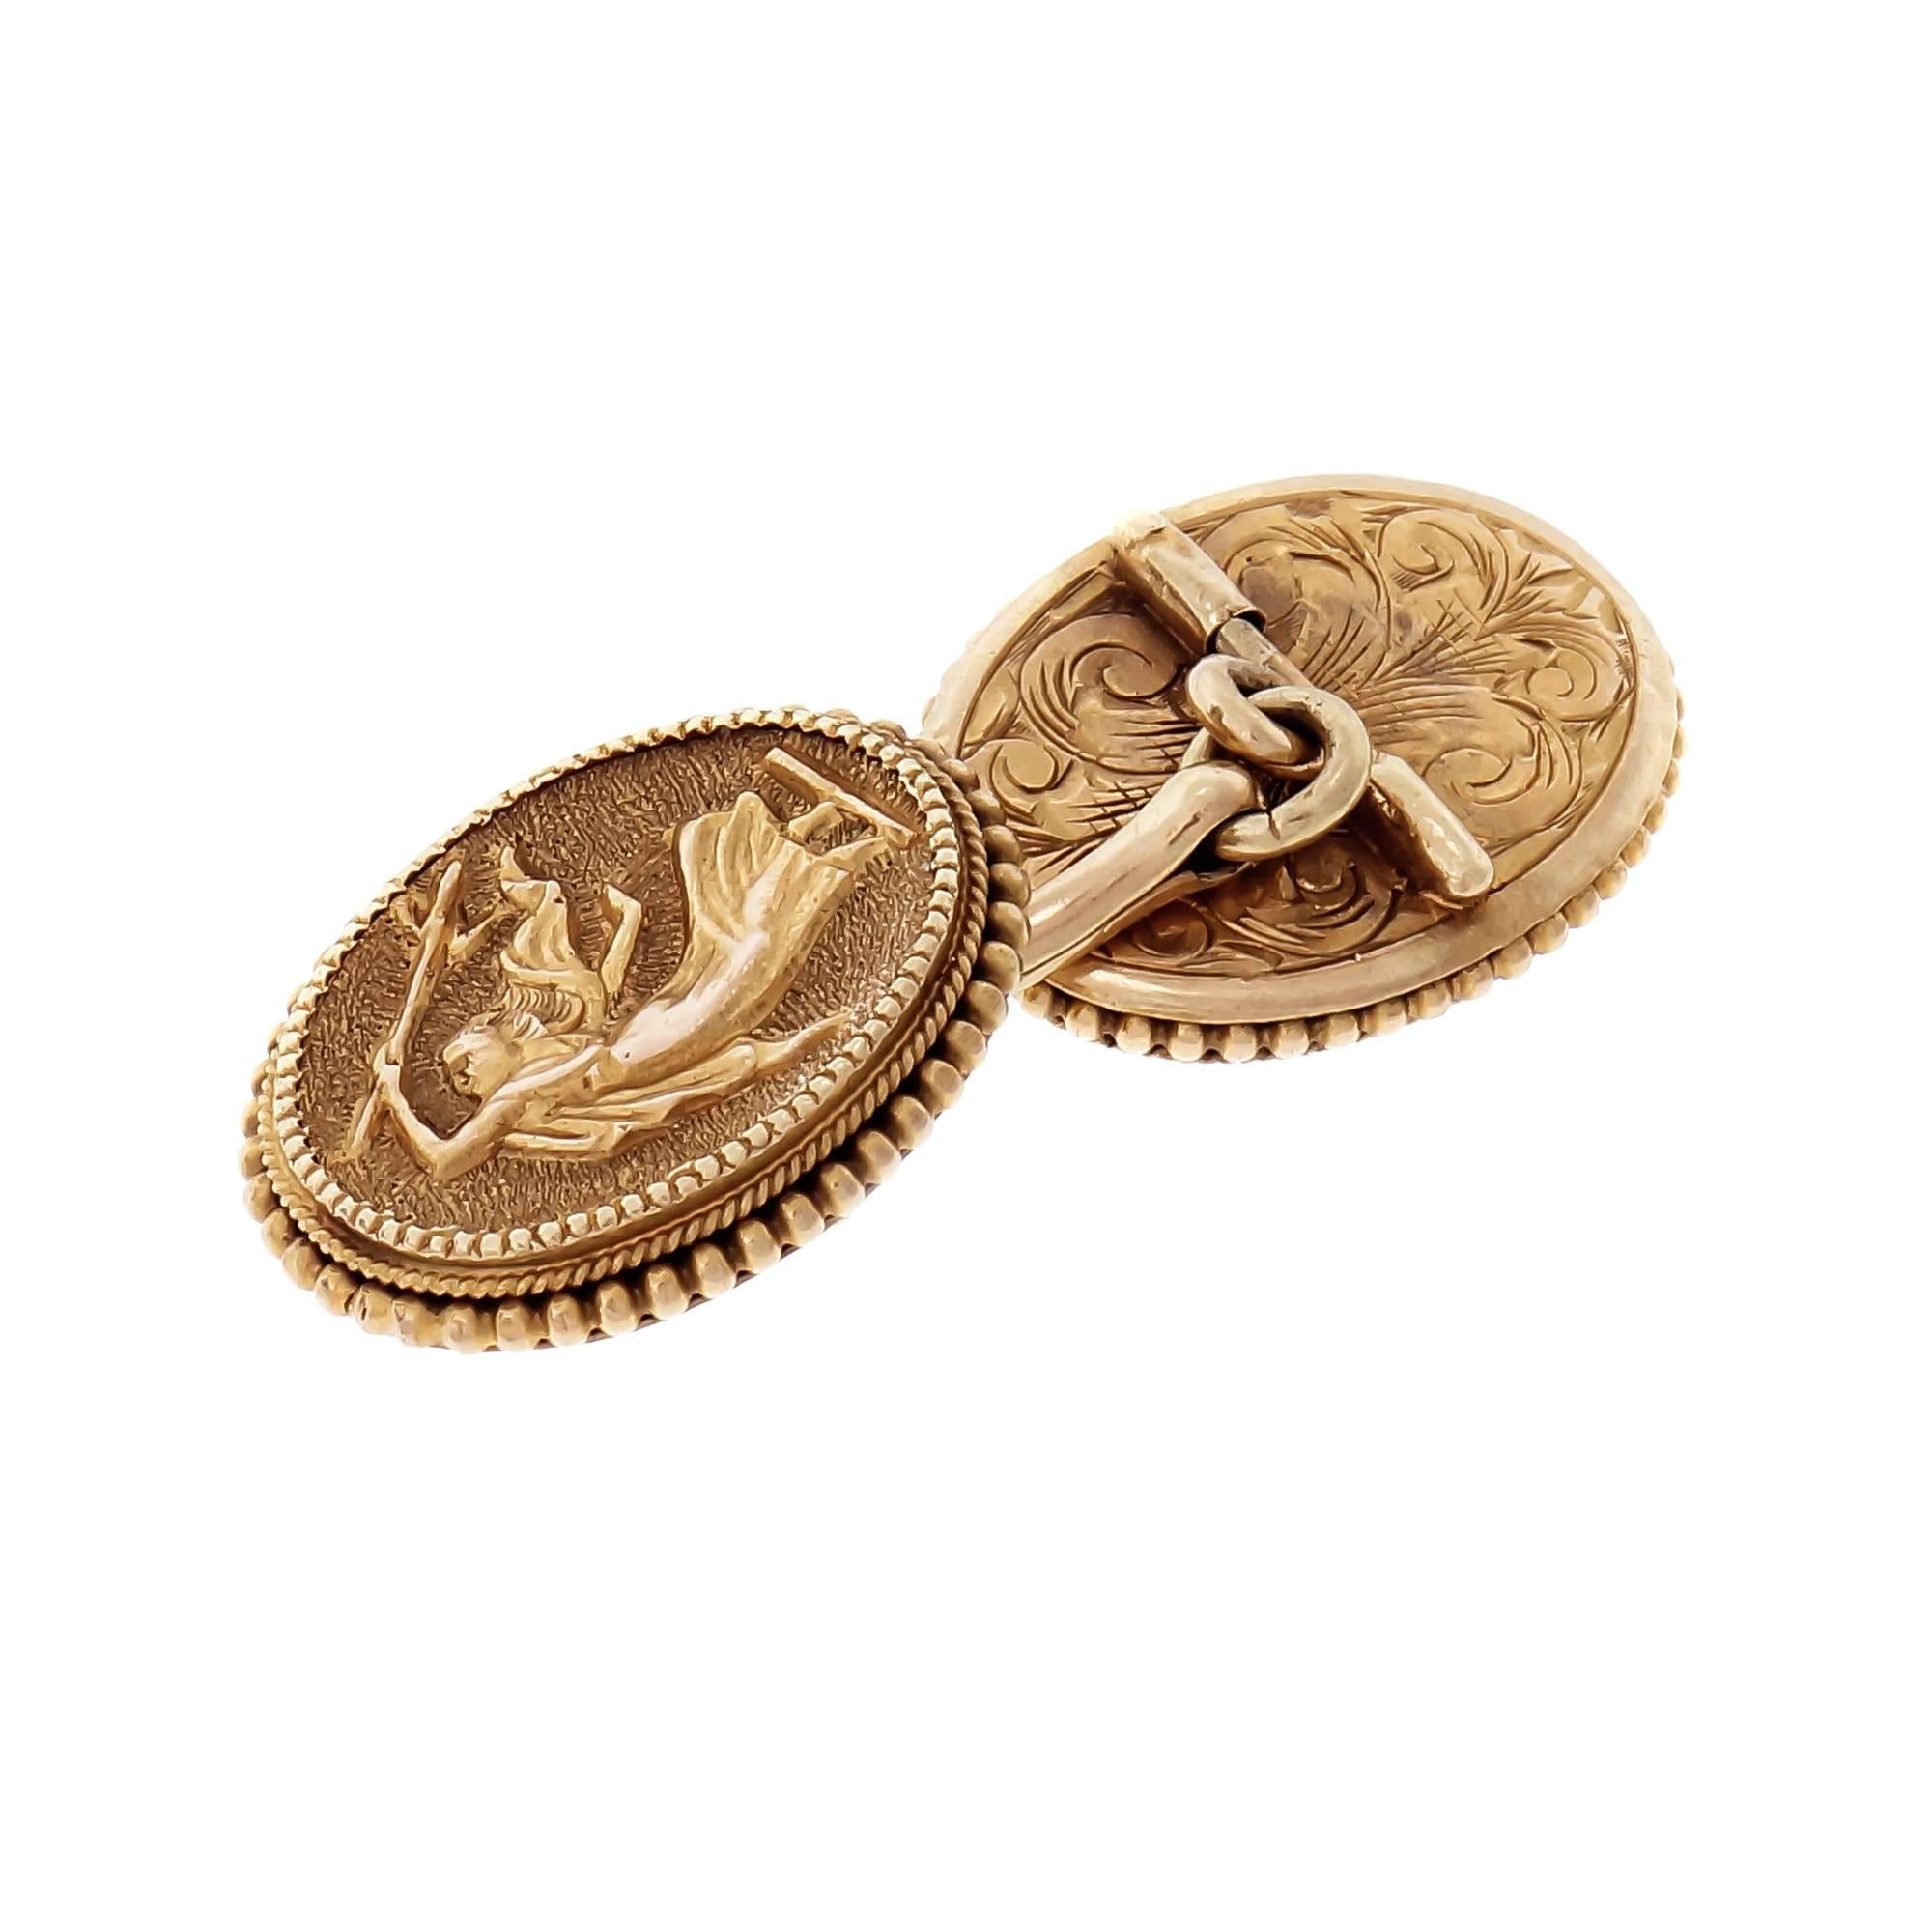 Etruscan Revival Engraved Double Sided Cufflinks For Sale 2